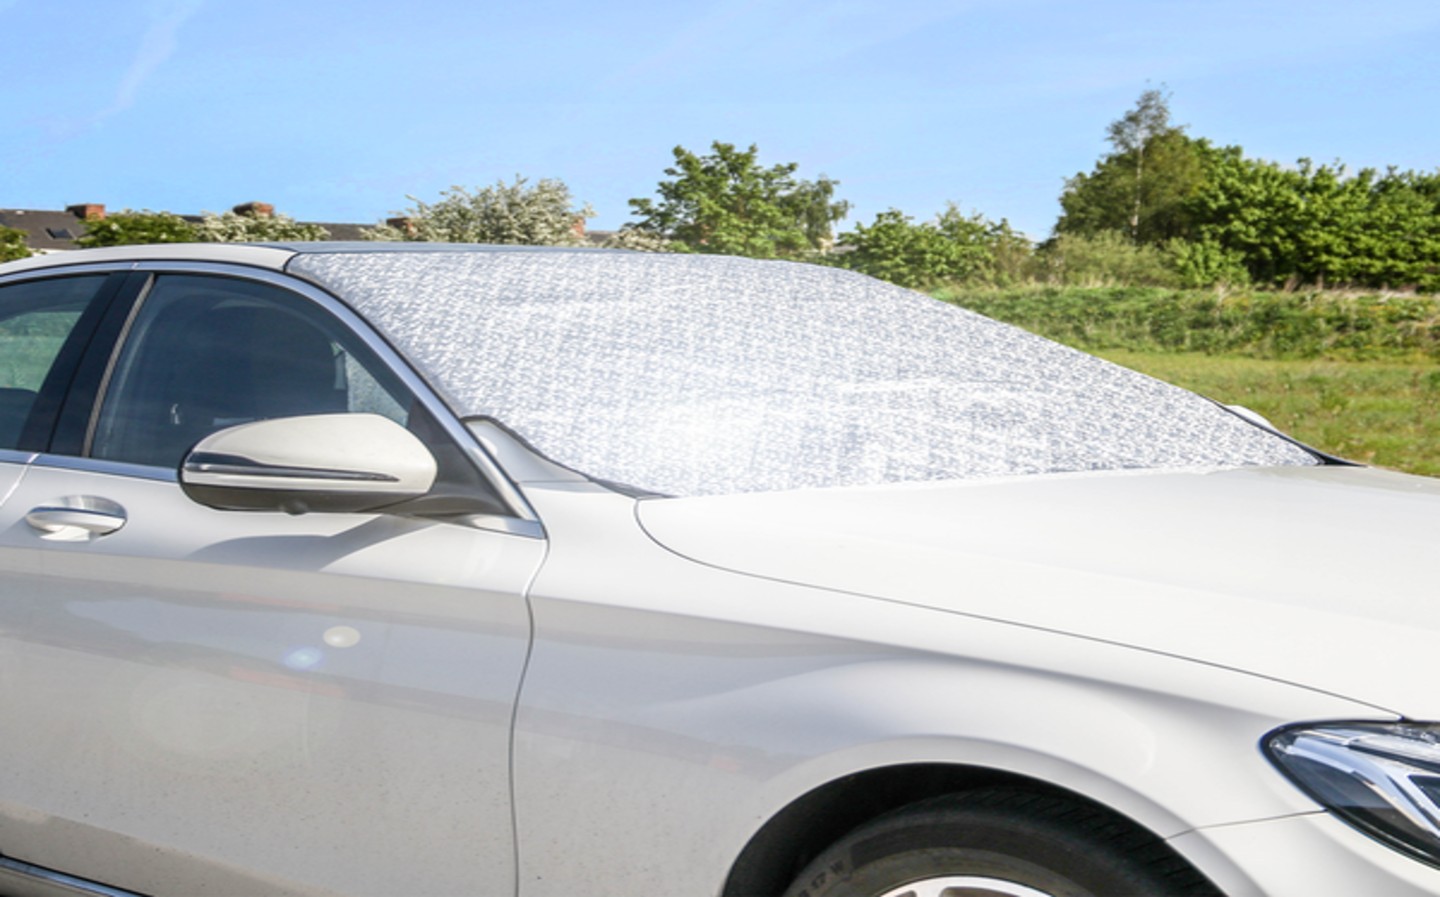 Lodenlli Car Windscreen Cover Anti Ice Snow Frost Shield Dust Protection Heat Sun Shade Ideally for Front Car Windshield 